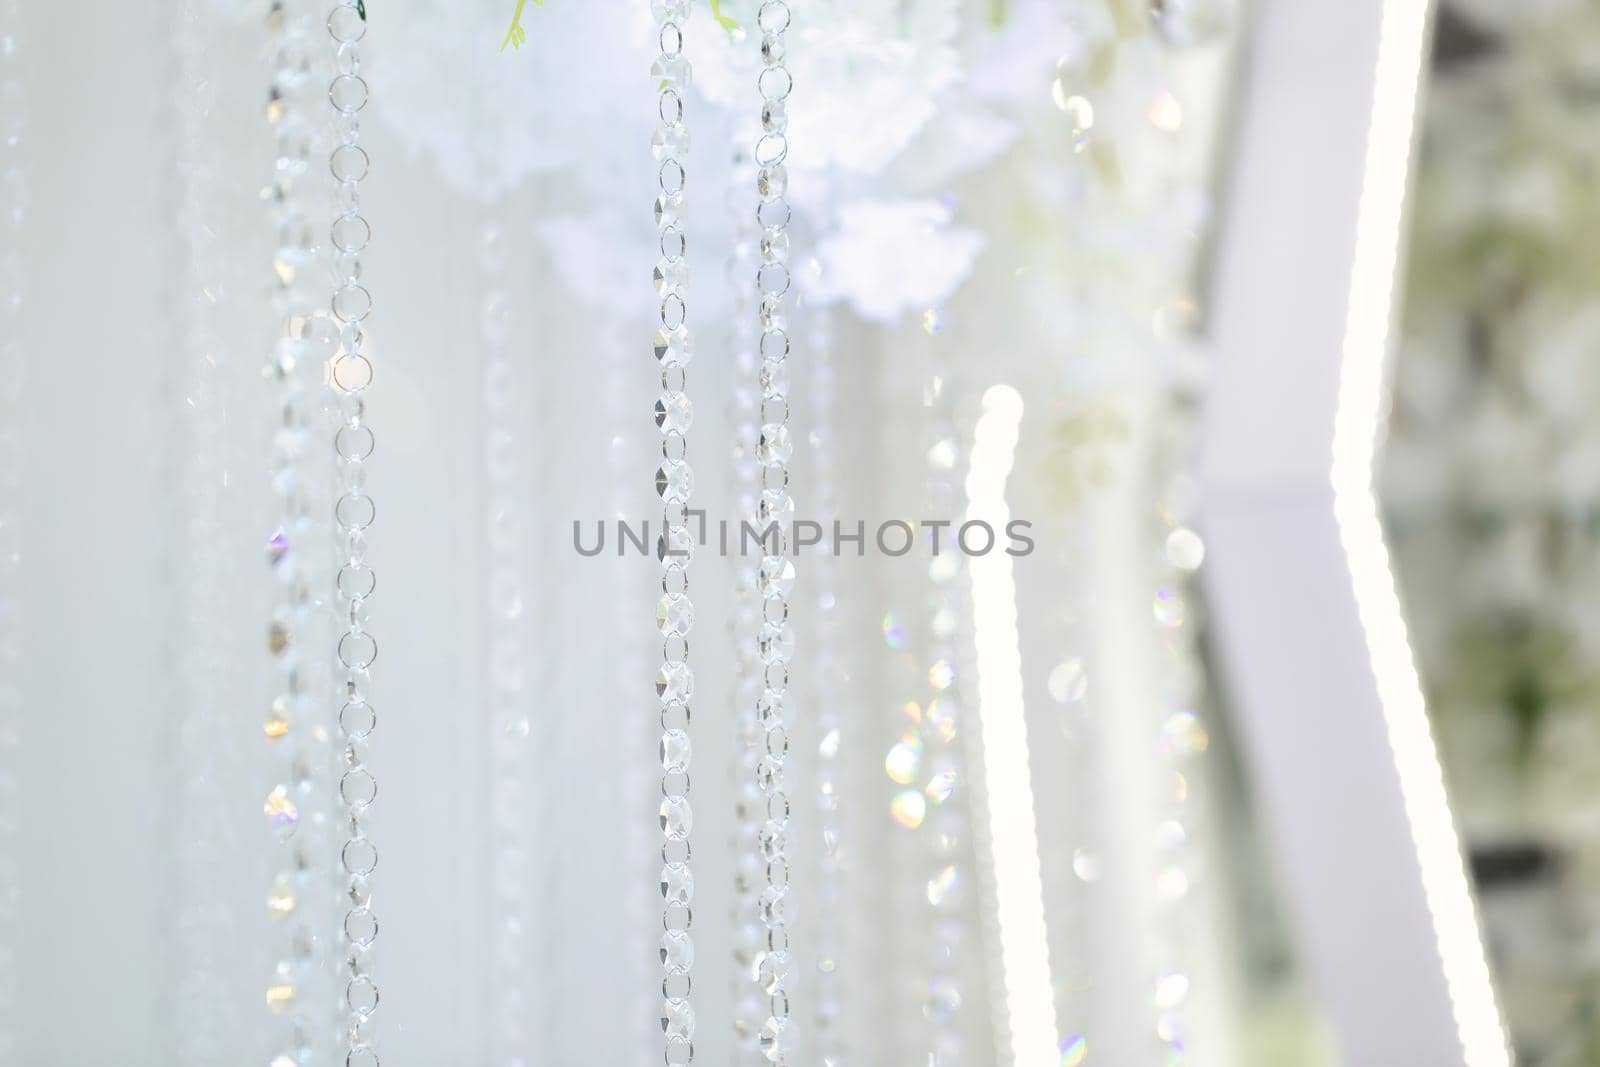 Details of the wedding ceremony made of fresh flowers, sparkling beads. Delicate and beautiful wedding decor for newlyweds by StudioPeace